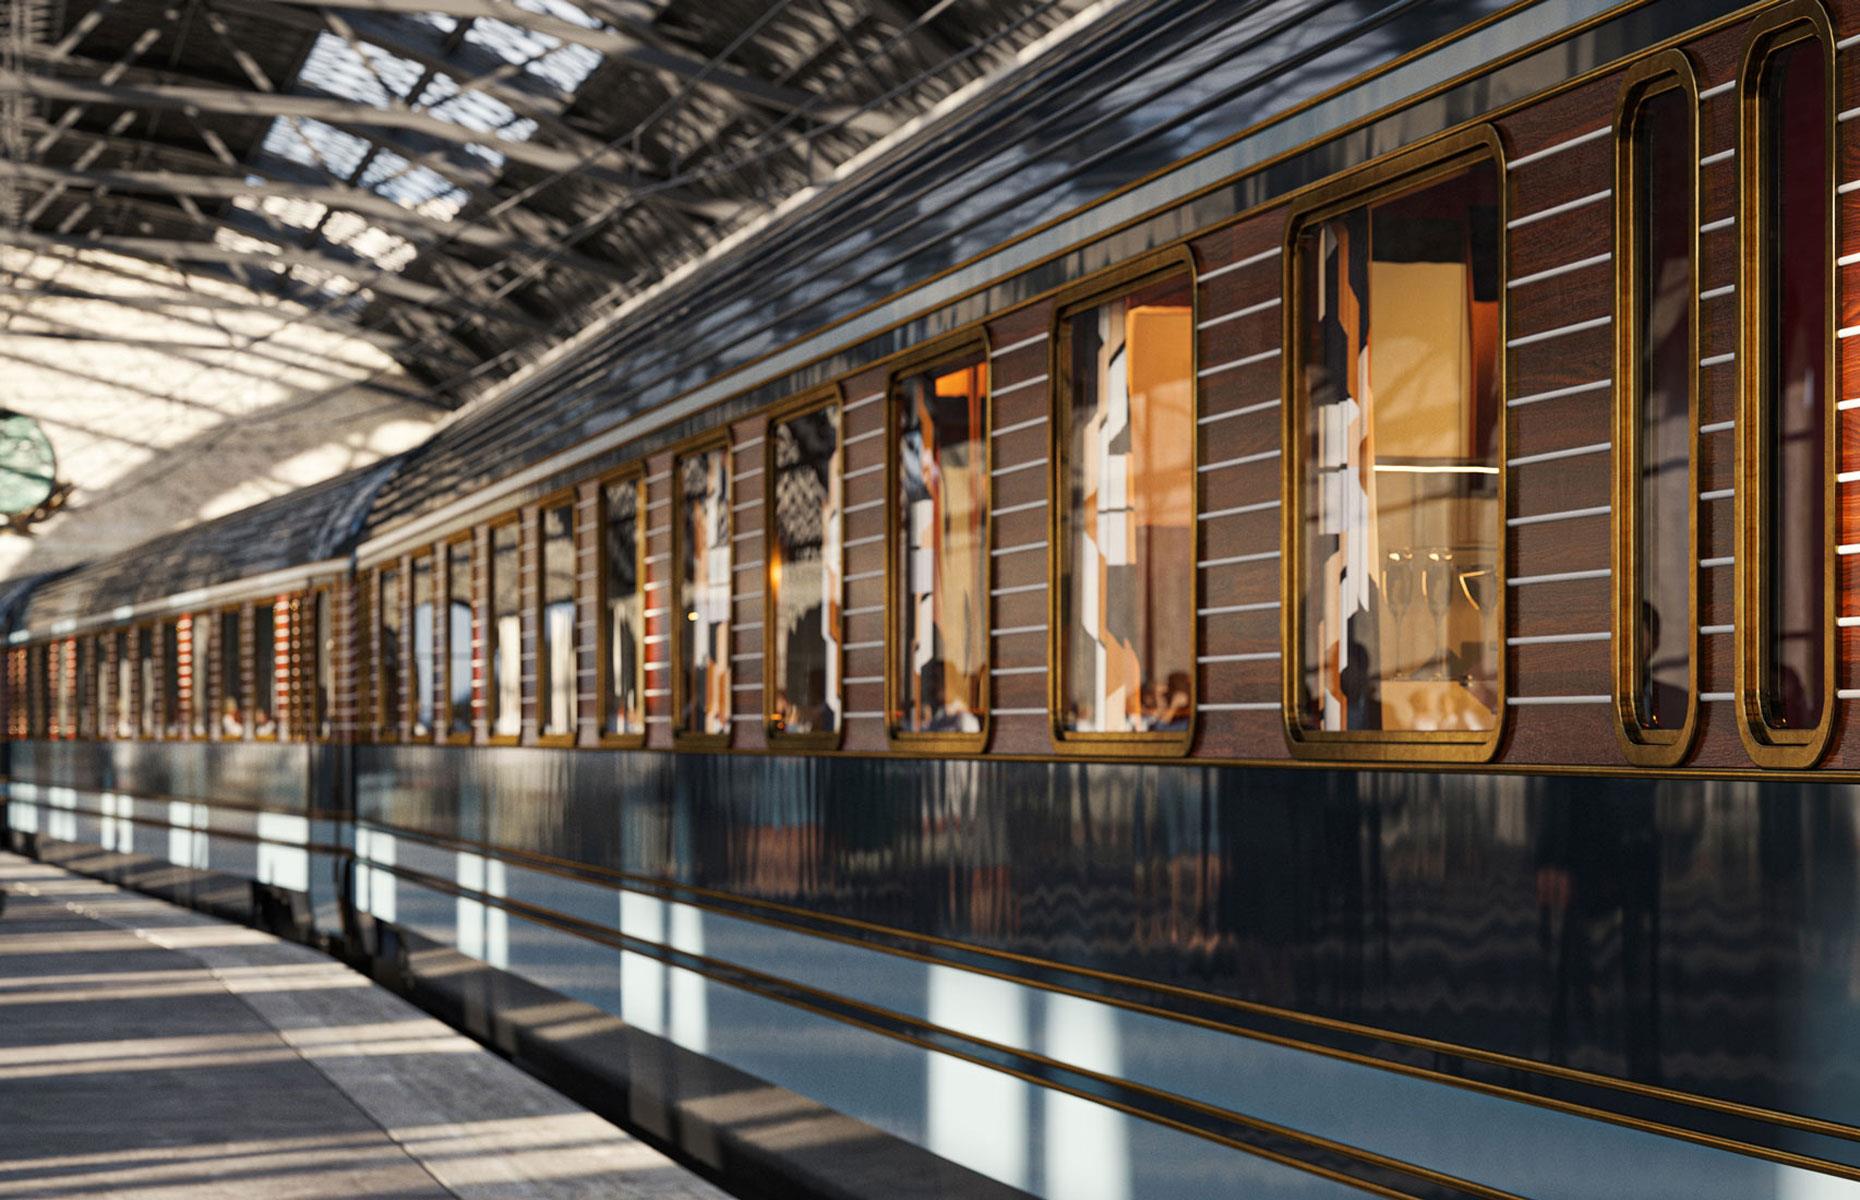 <p>The Orient Express brand belongs to French rail operator SNCF and AccorHotels, each controlling 50%. Accor snapped up its share in 2017 and is launching its first Orient Express-branded rail service this year.</p>  <p>The train pays homage to Italy's fabulous Dolce Vita period of the late 1950s and early 1960s, and its slick midcentury-modern interior design harks back to that era.</p>